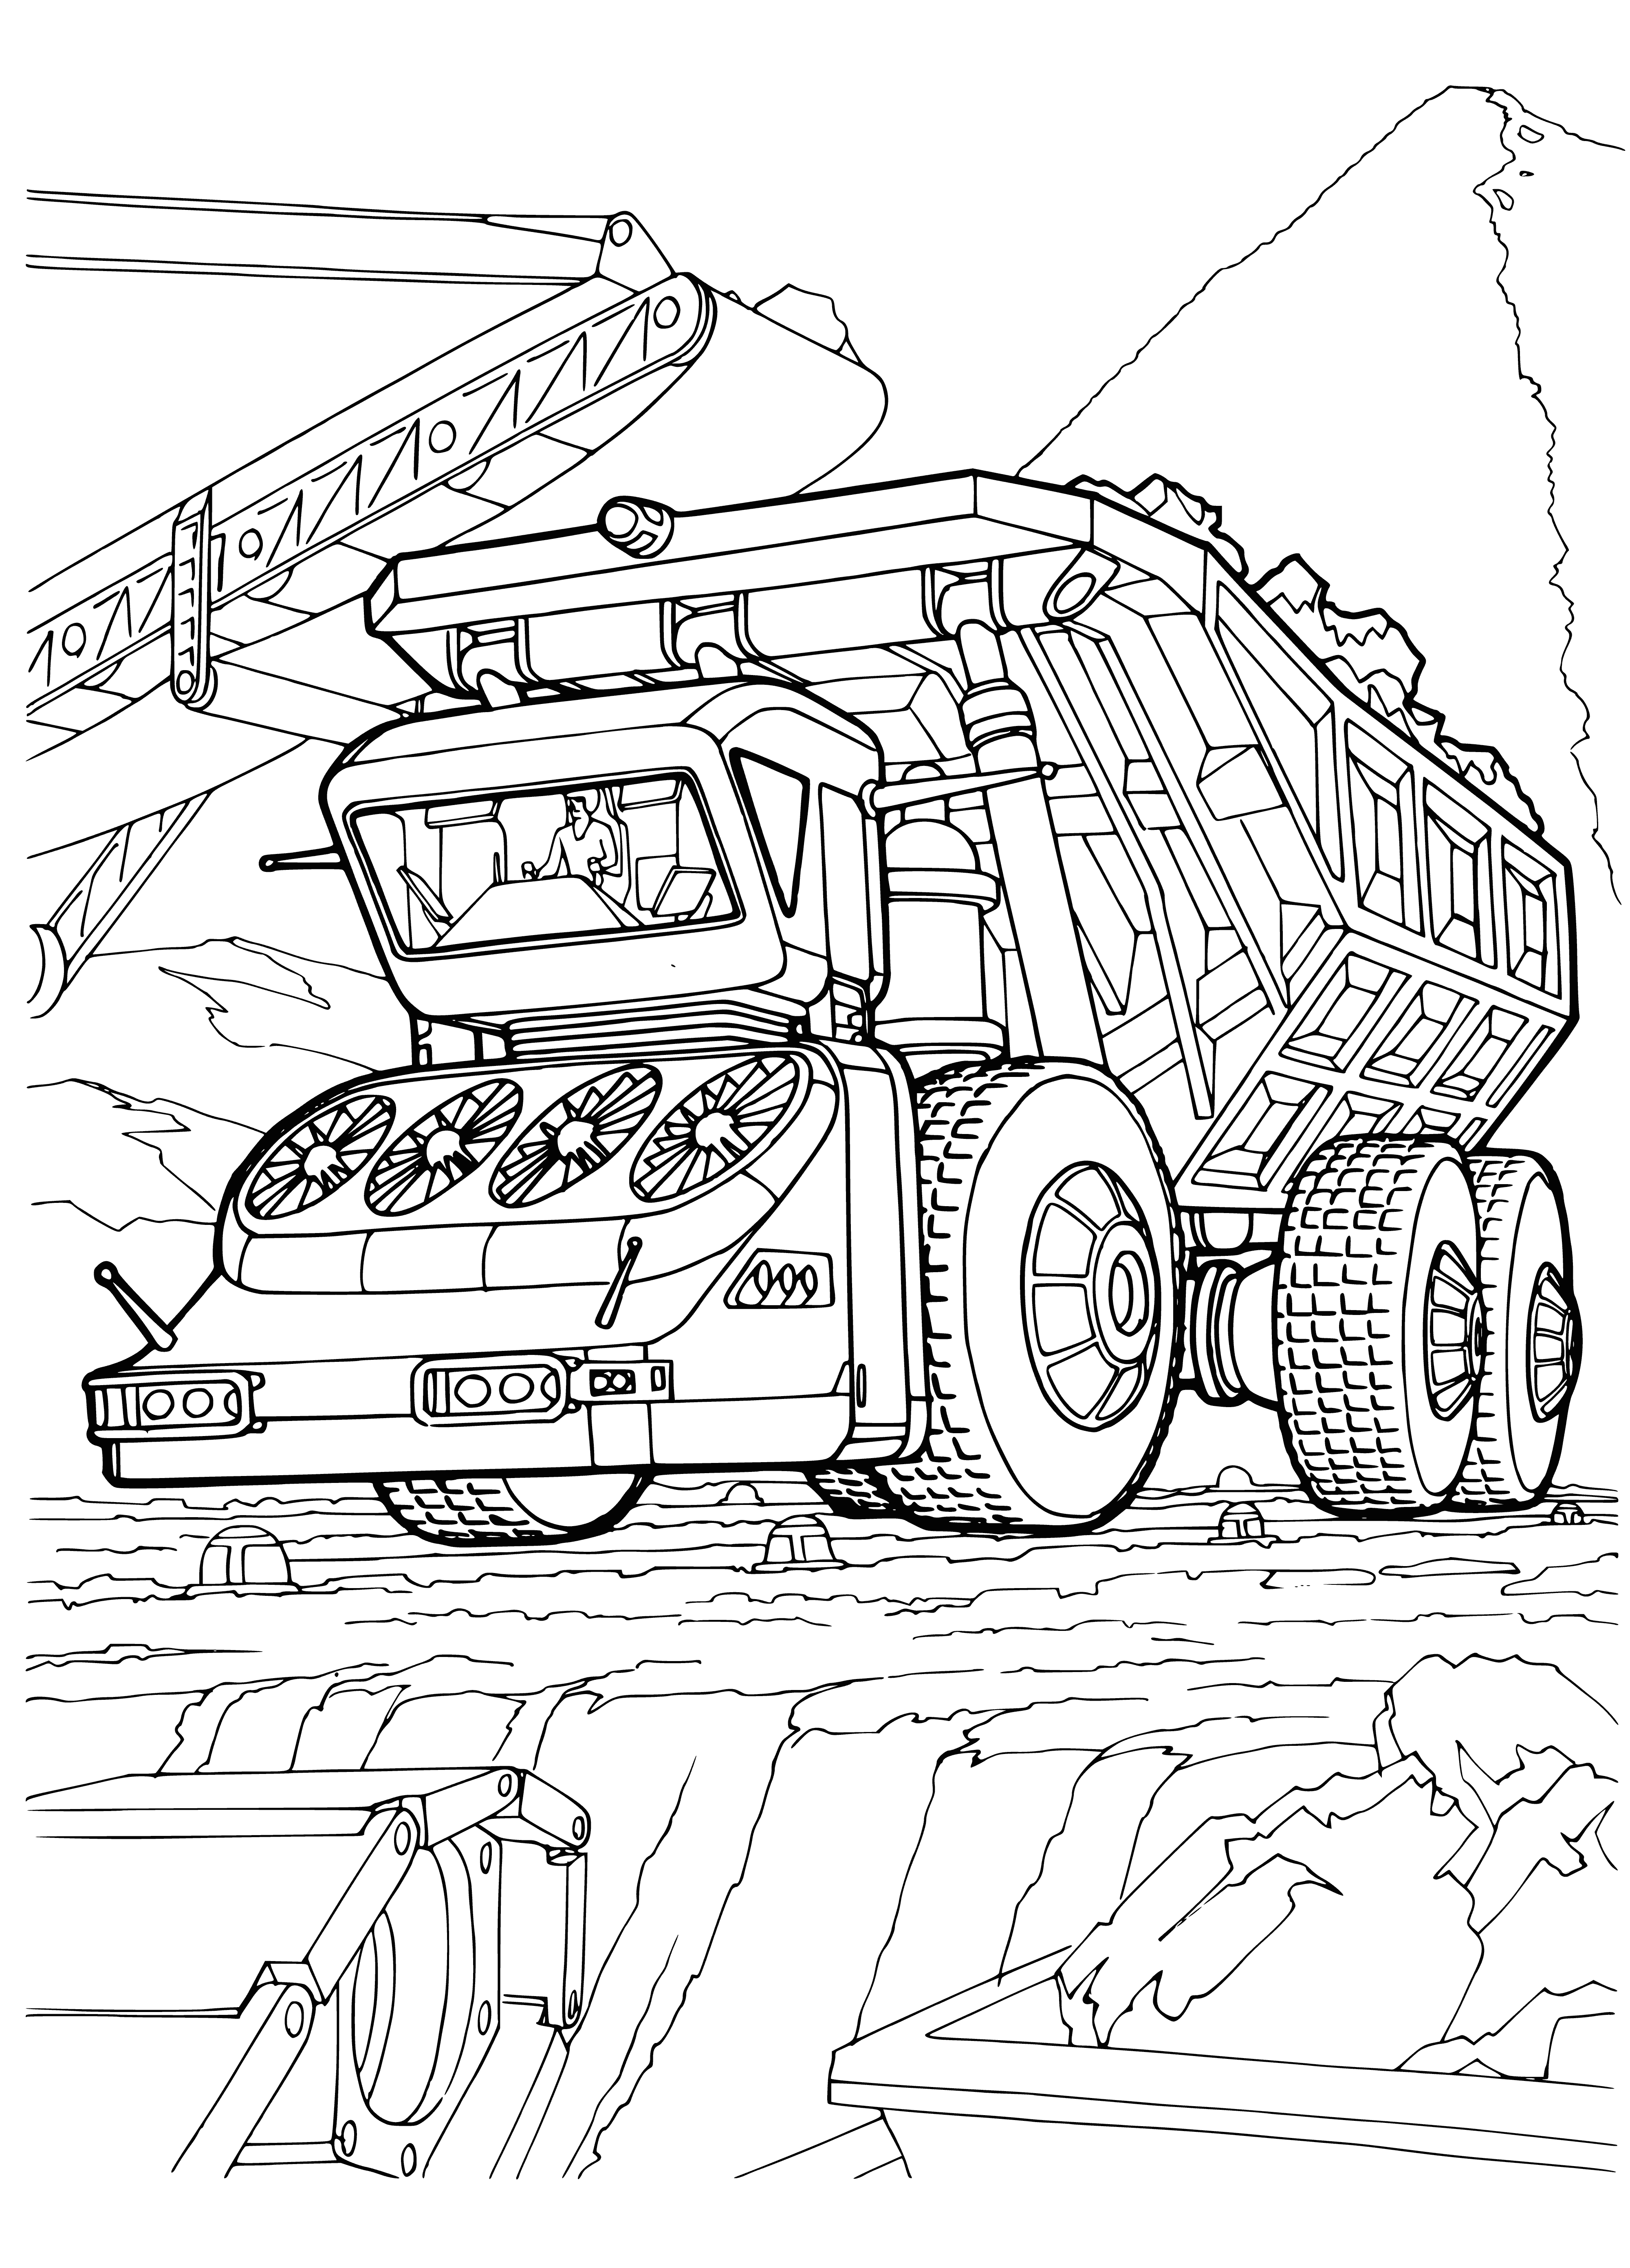 coloring page: The future of truck transport is electric and autonomous - controlled by a computer, with a sleek white design, no emissions, and no driver. #electricvehicles #autonomousvehicles